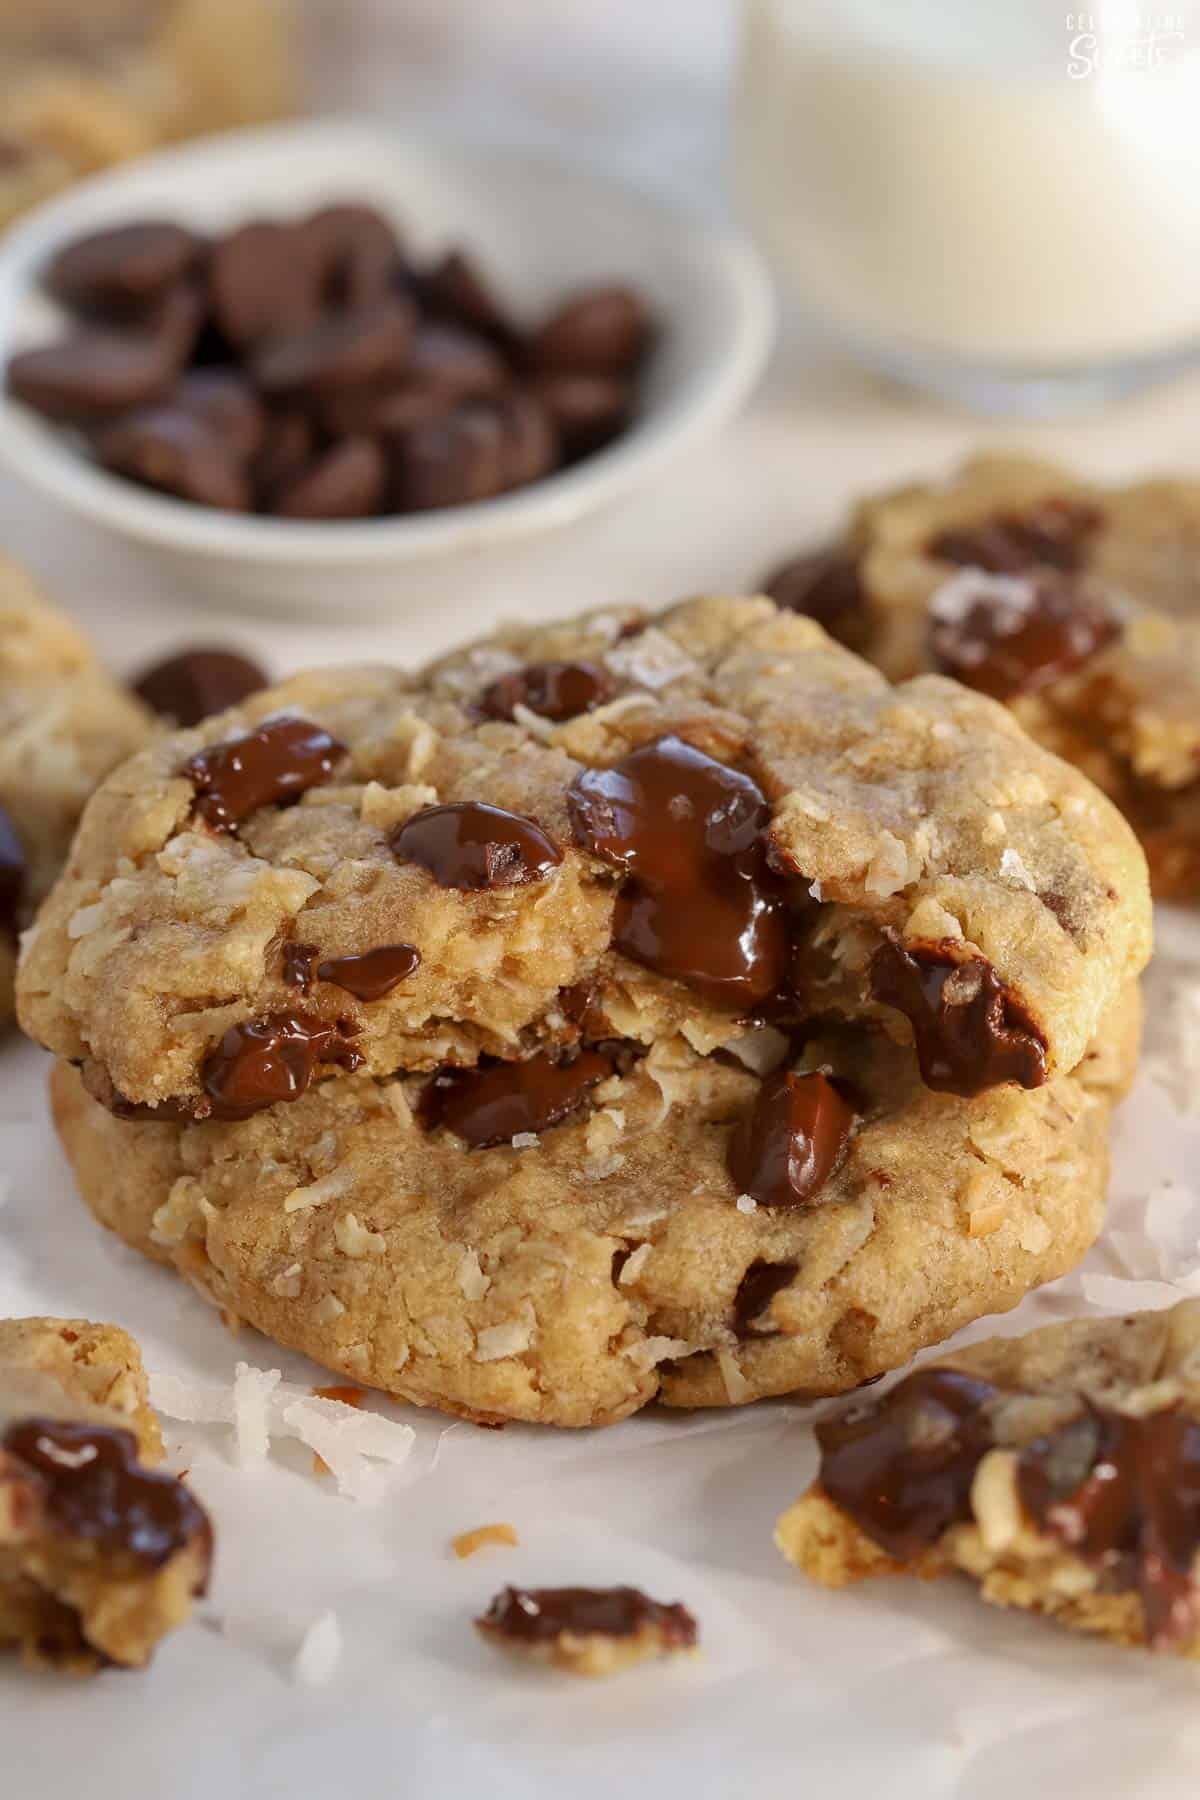 Oatmeal cookie broken in half filled with chocolate chips.